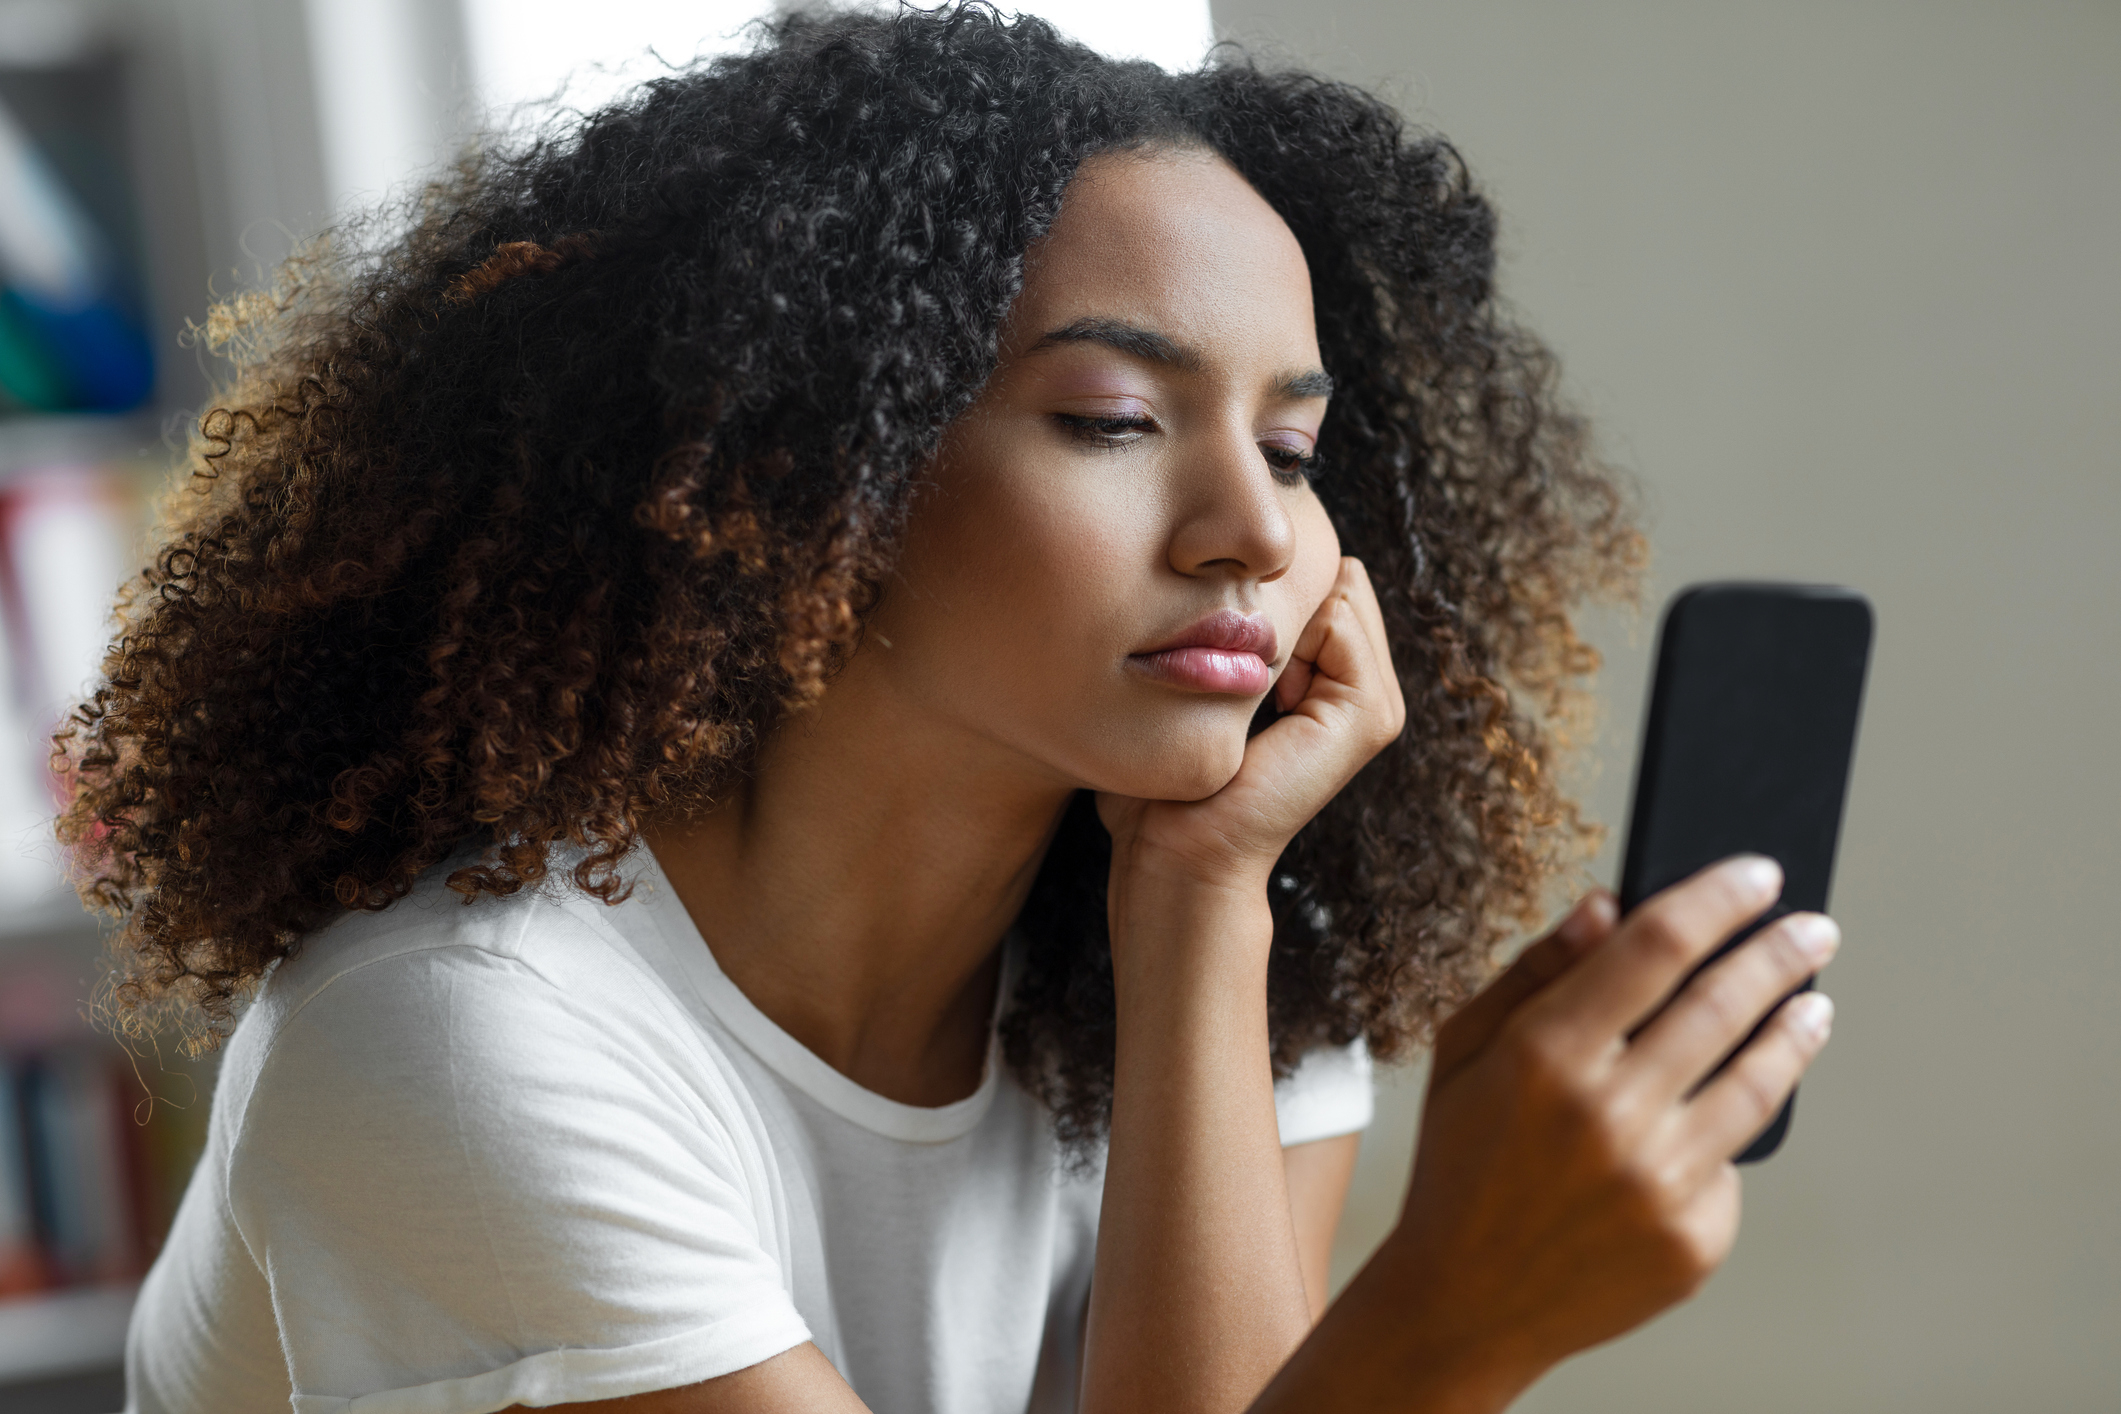 Woman in a white shirt looks at her smartphone, her expression thoughtful or concerned